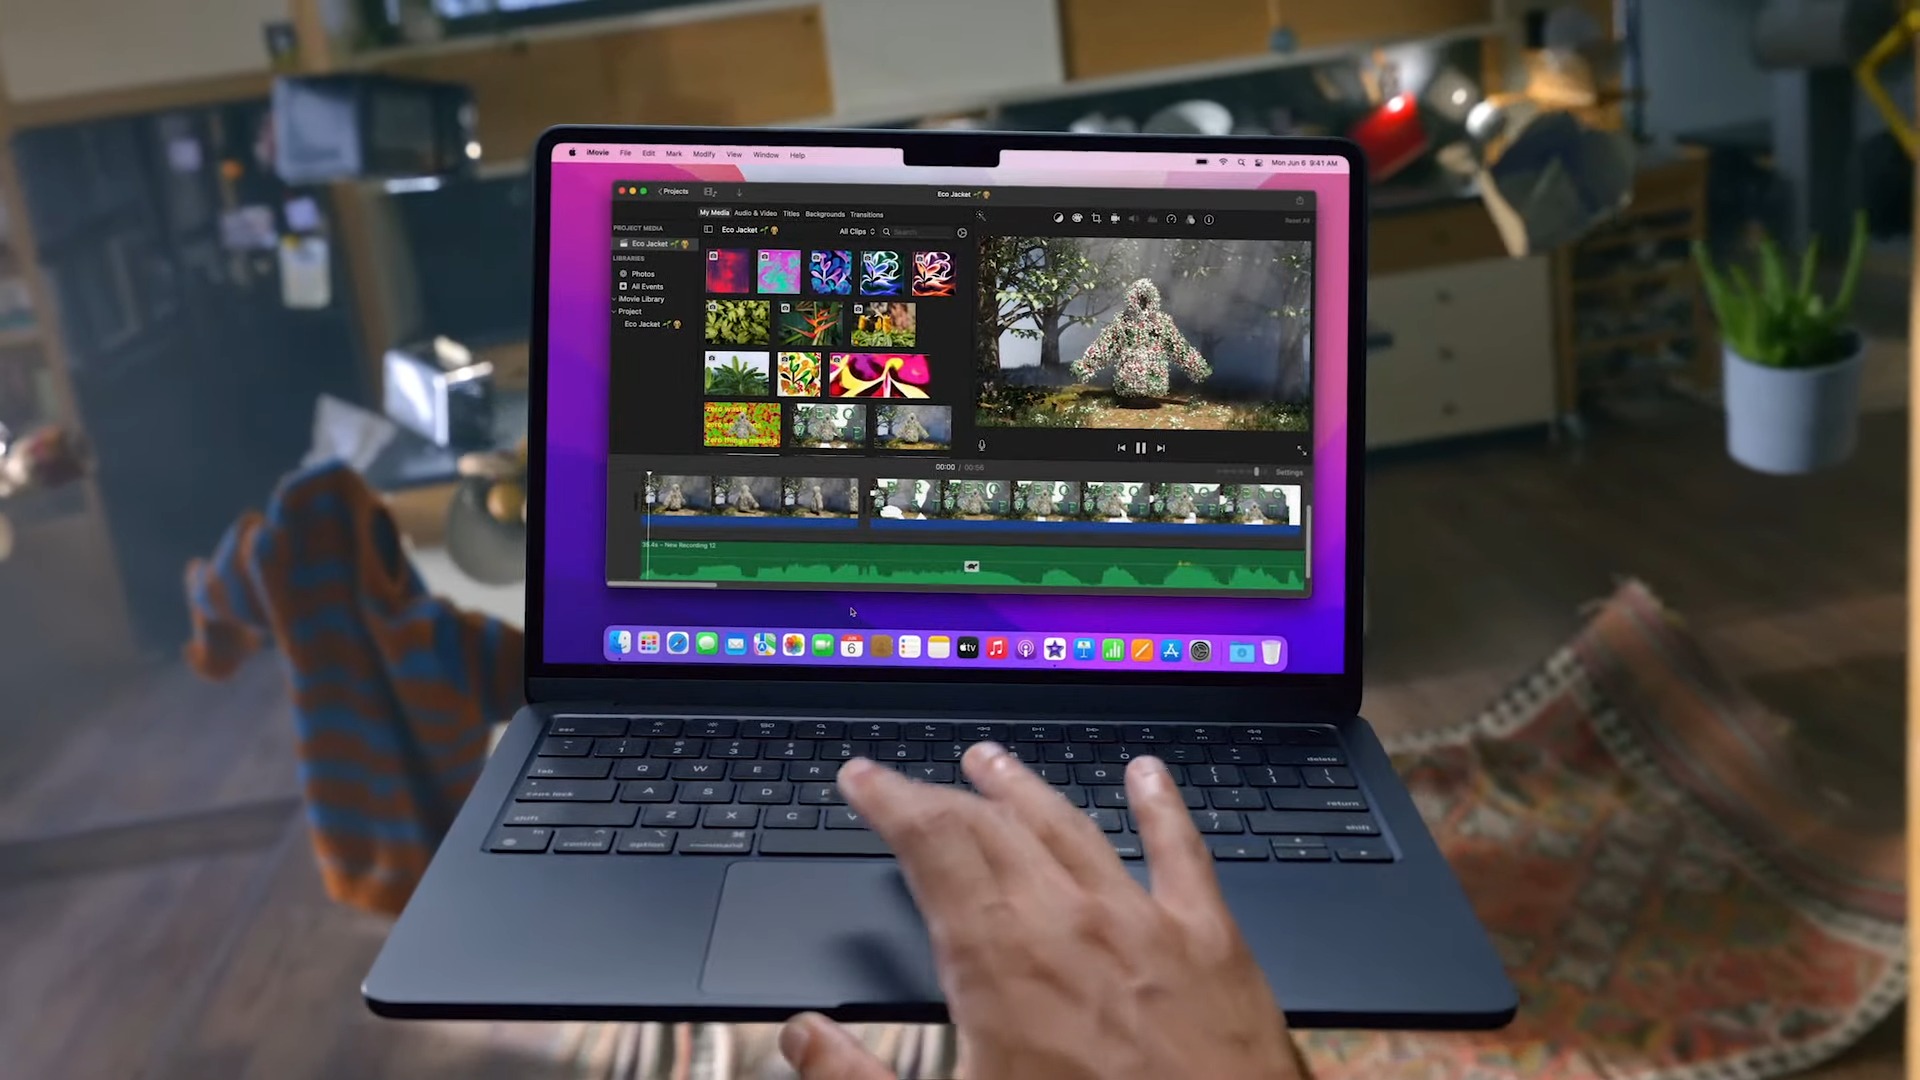 Apple's rumored 15-inch MacBook could have an M2 Pro